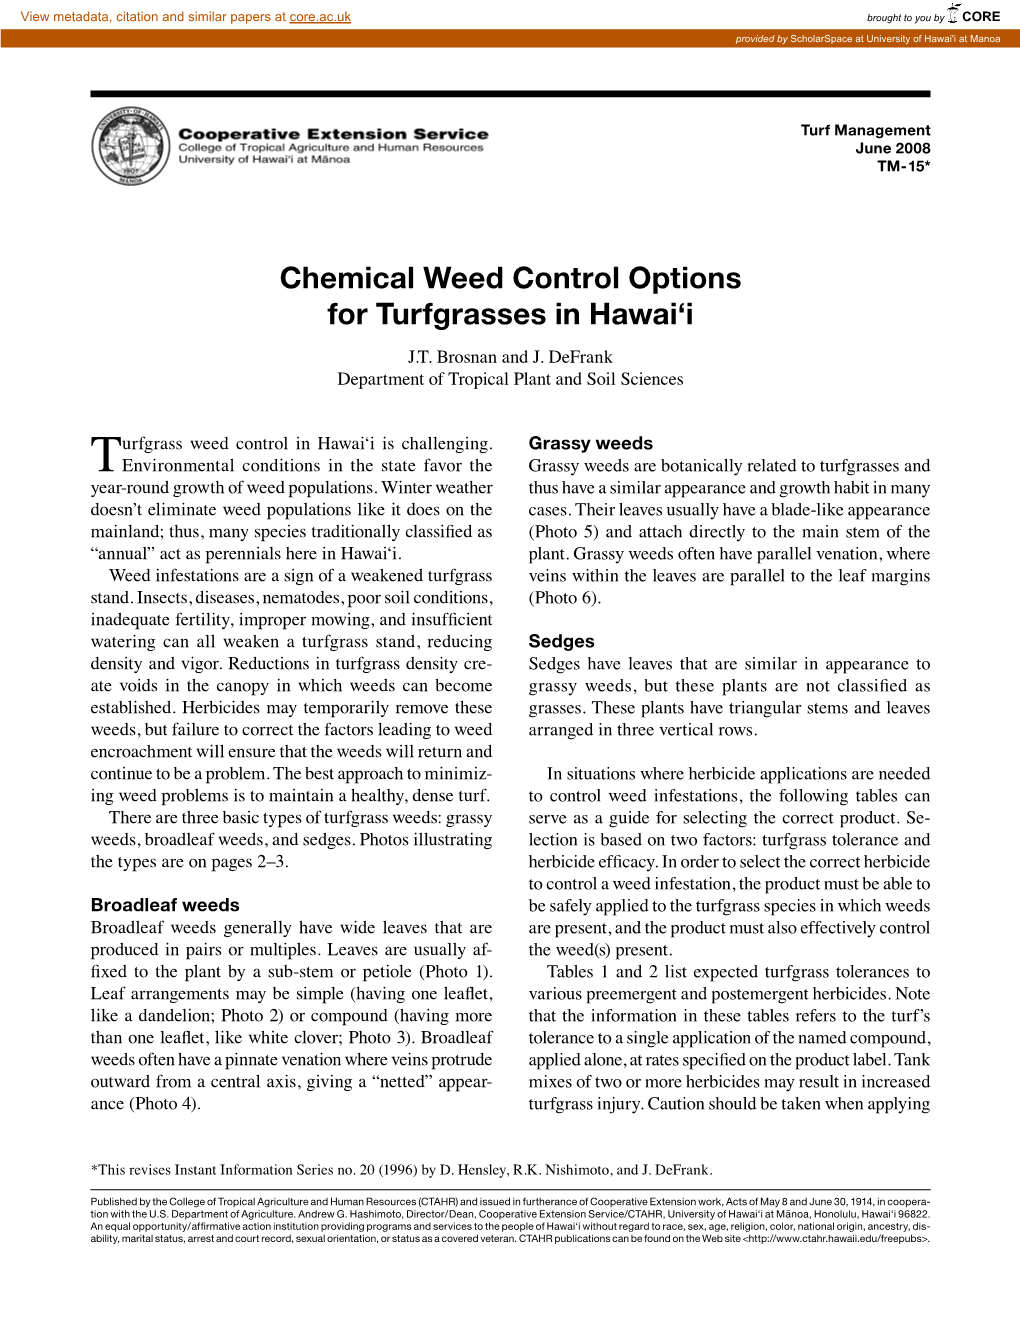 Chemical Weed Control Options for Turfgrasses in Hawai'i